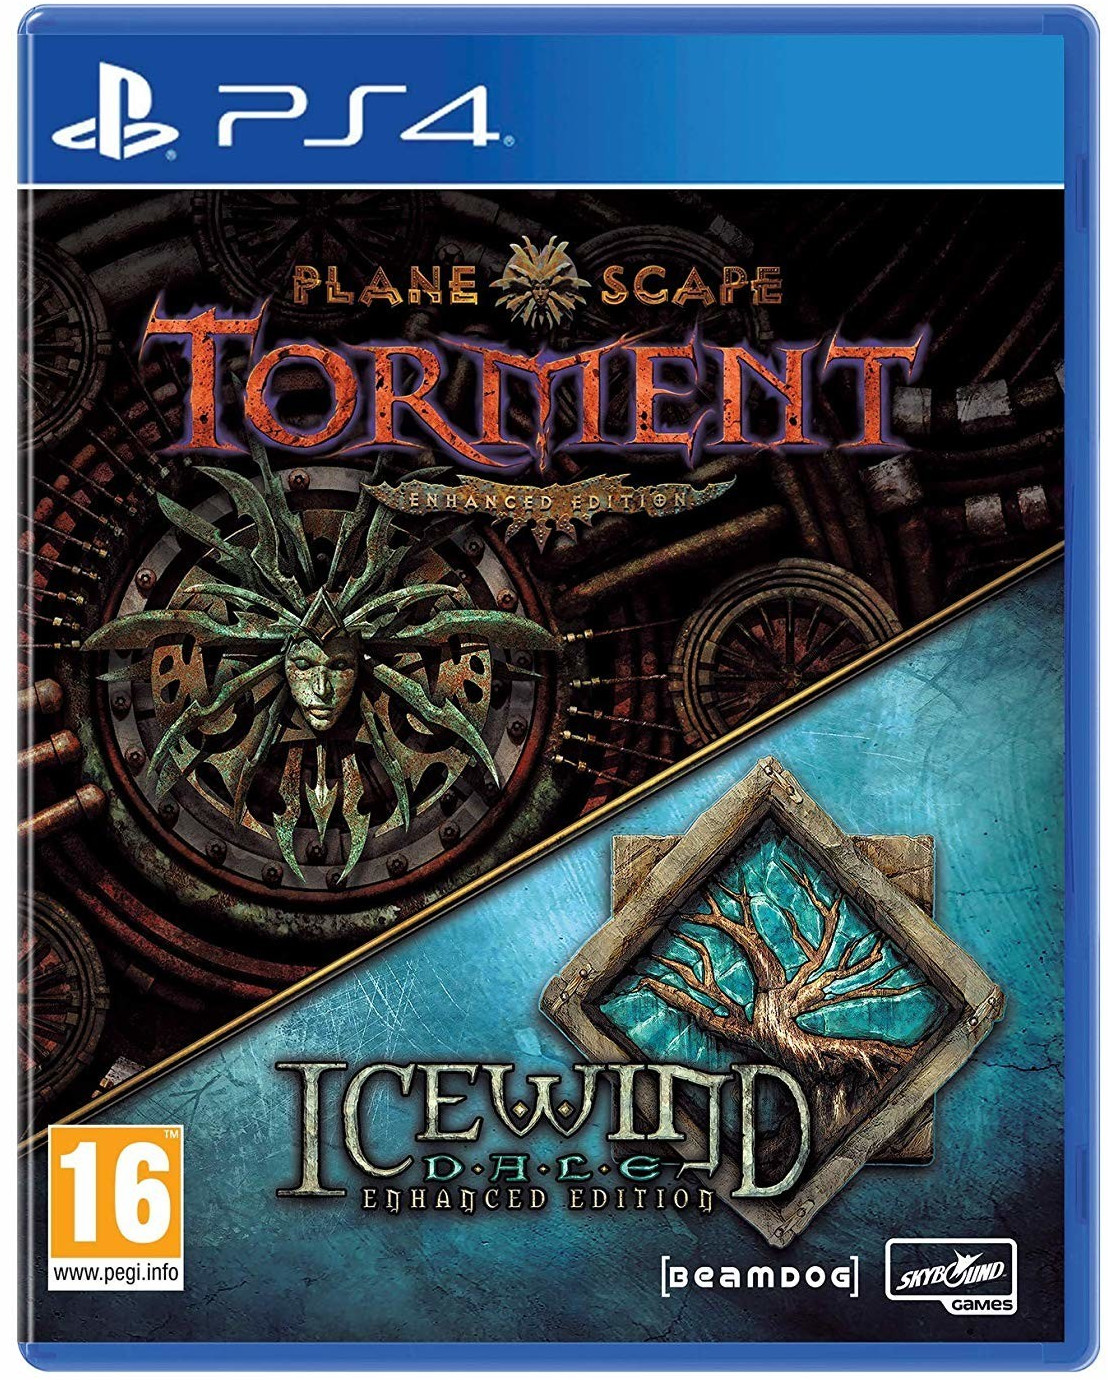 Photos - Game Skybound  Planescape: Torment + Icewind Dale - Enhanced Edition (PS4)